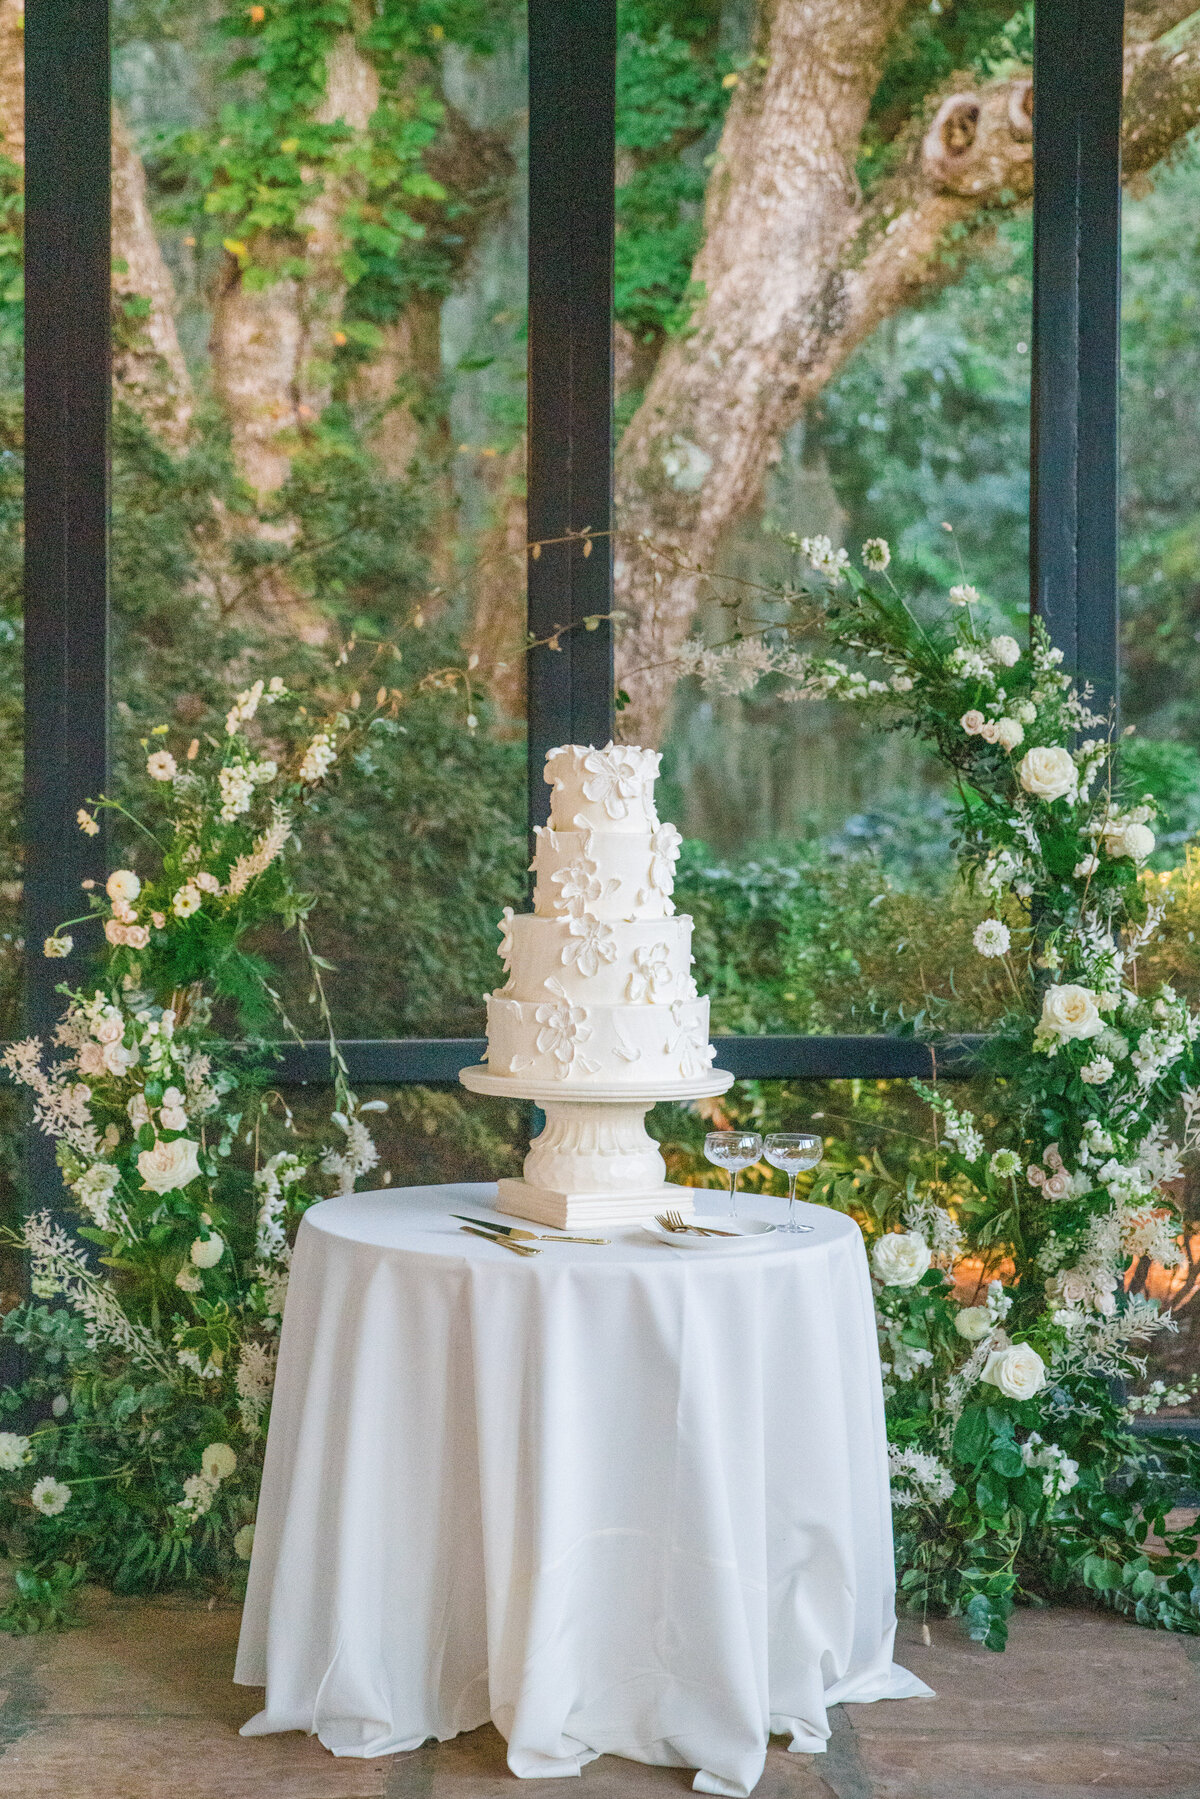 cake displayed on table with floral arch around it